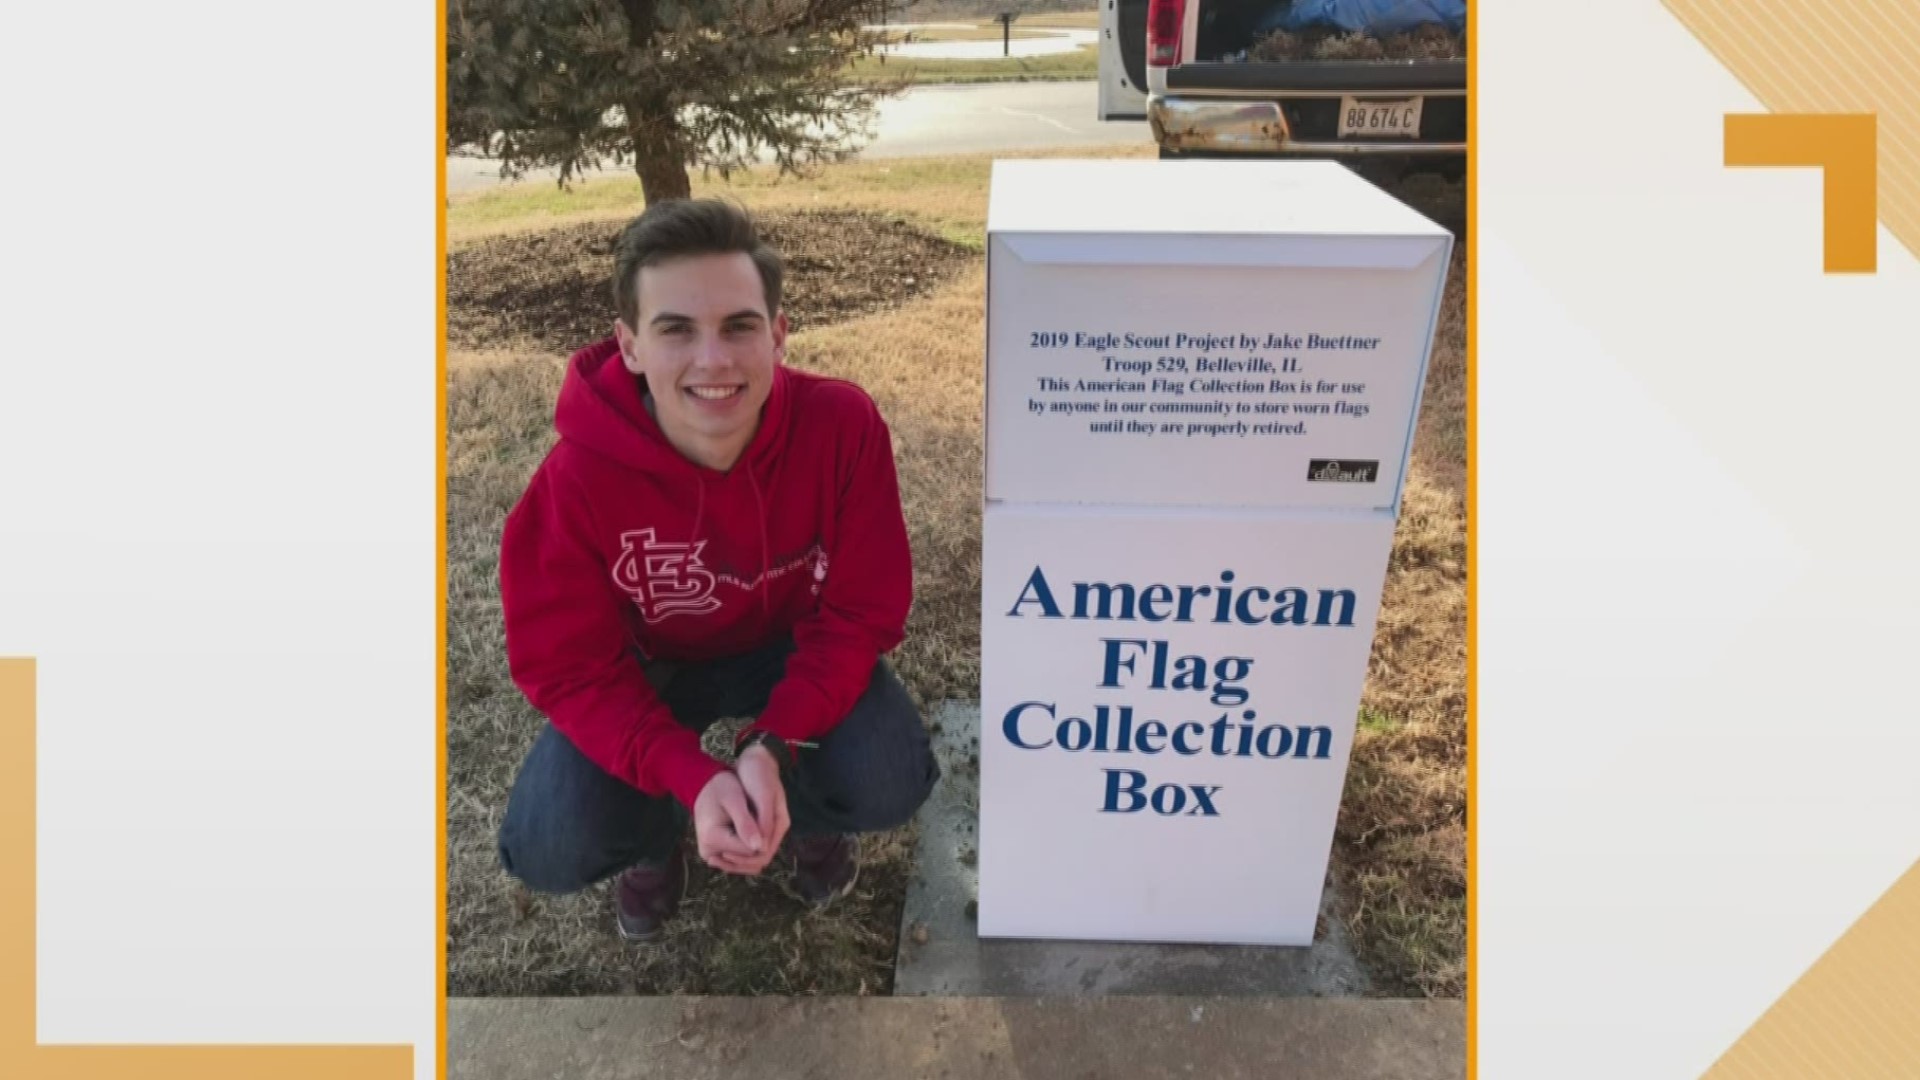 The drop box is part of Jake Buettner's Eagle Scout project